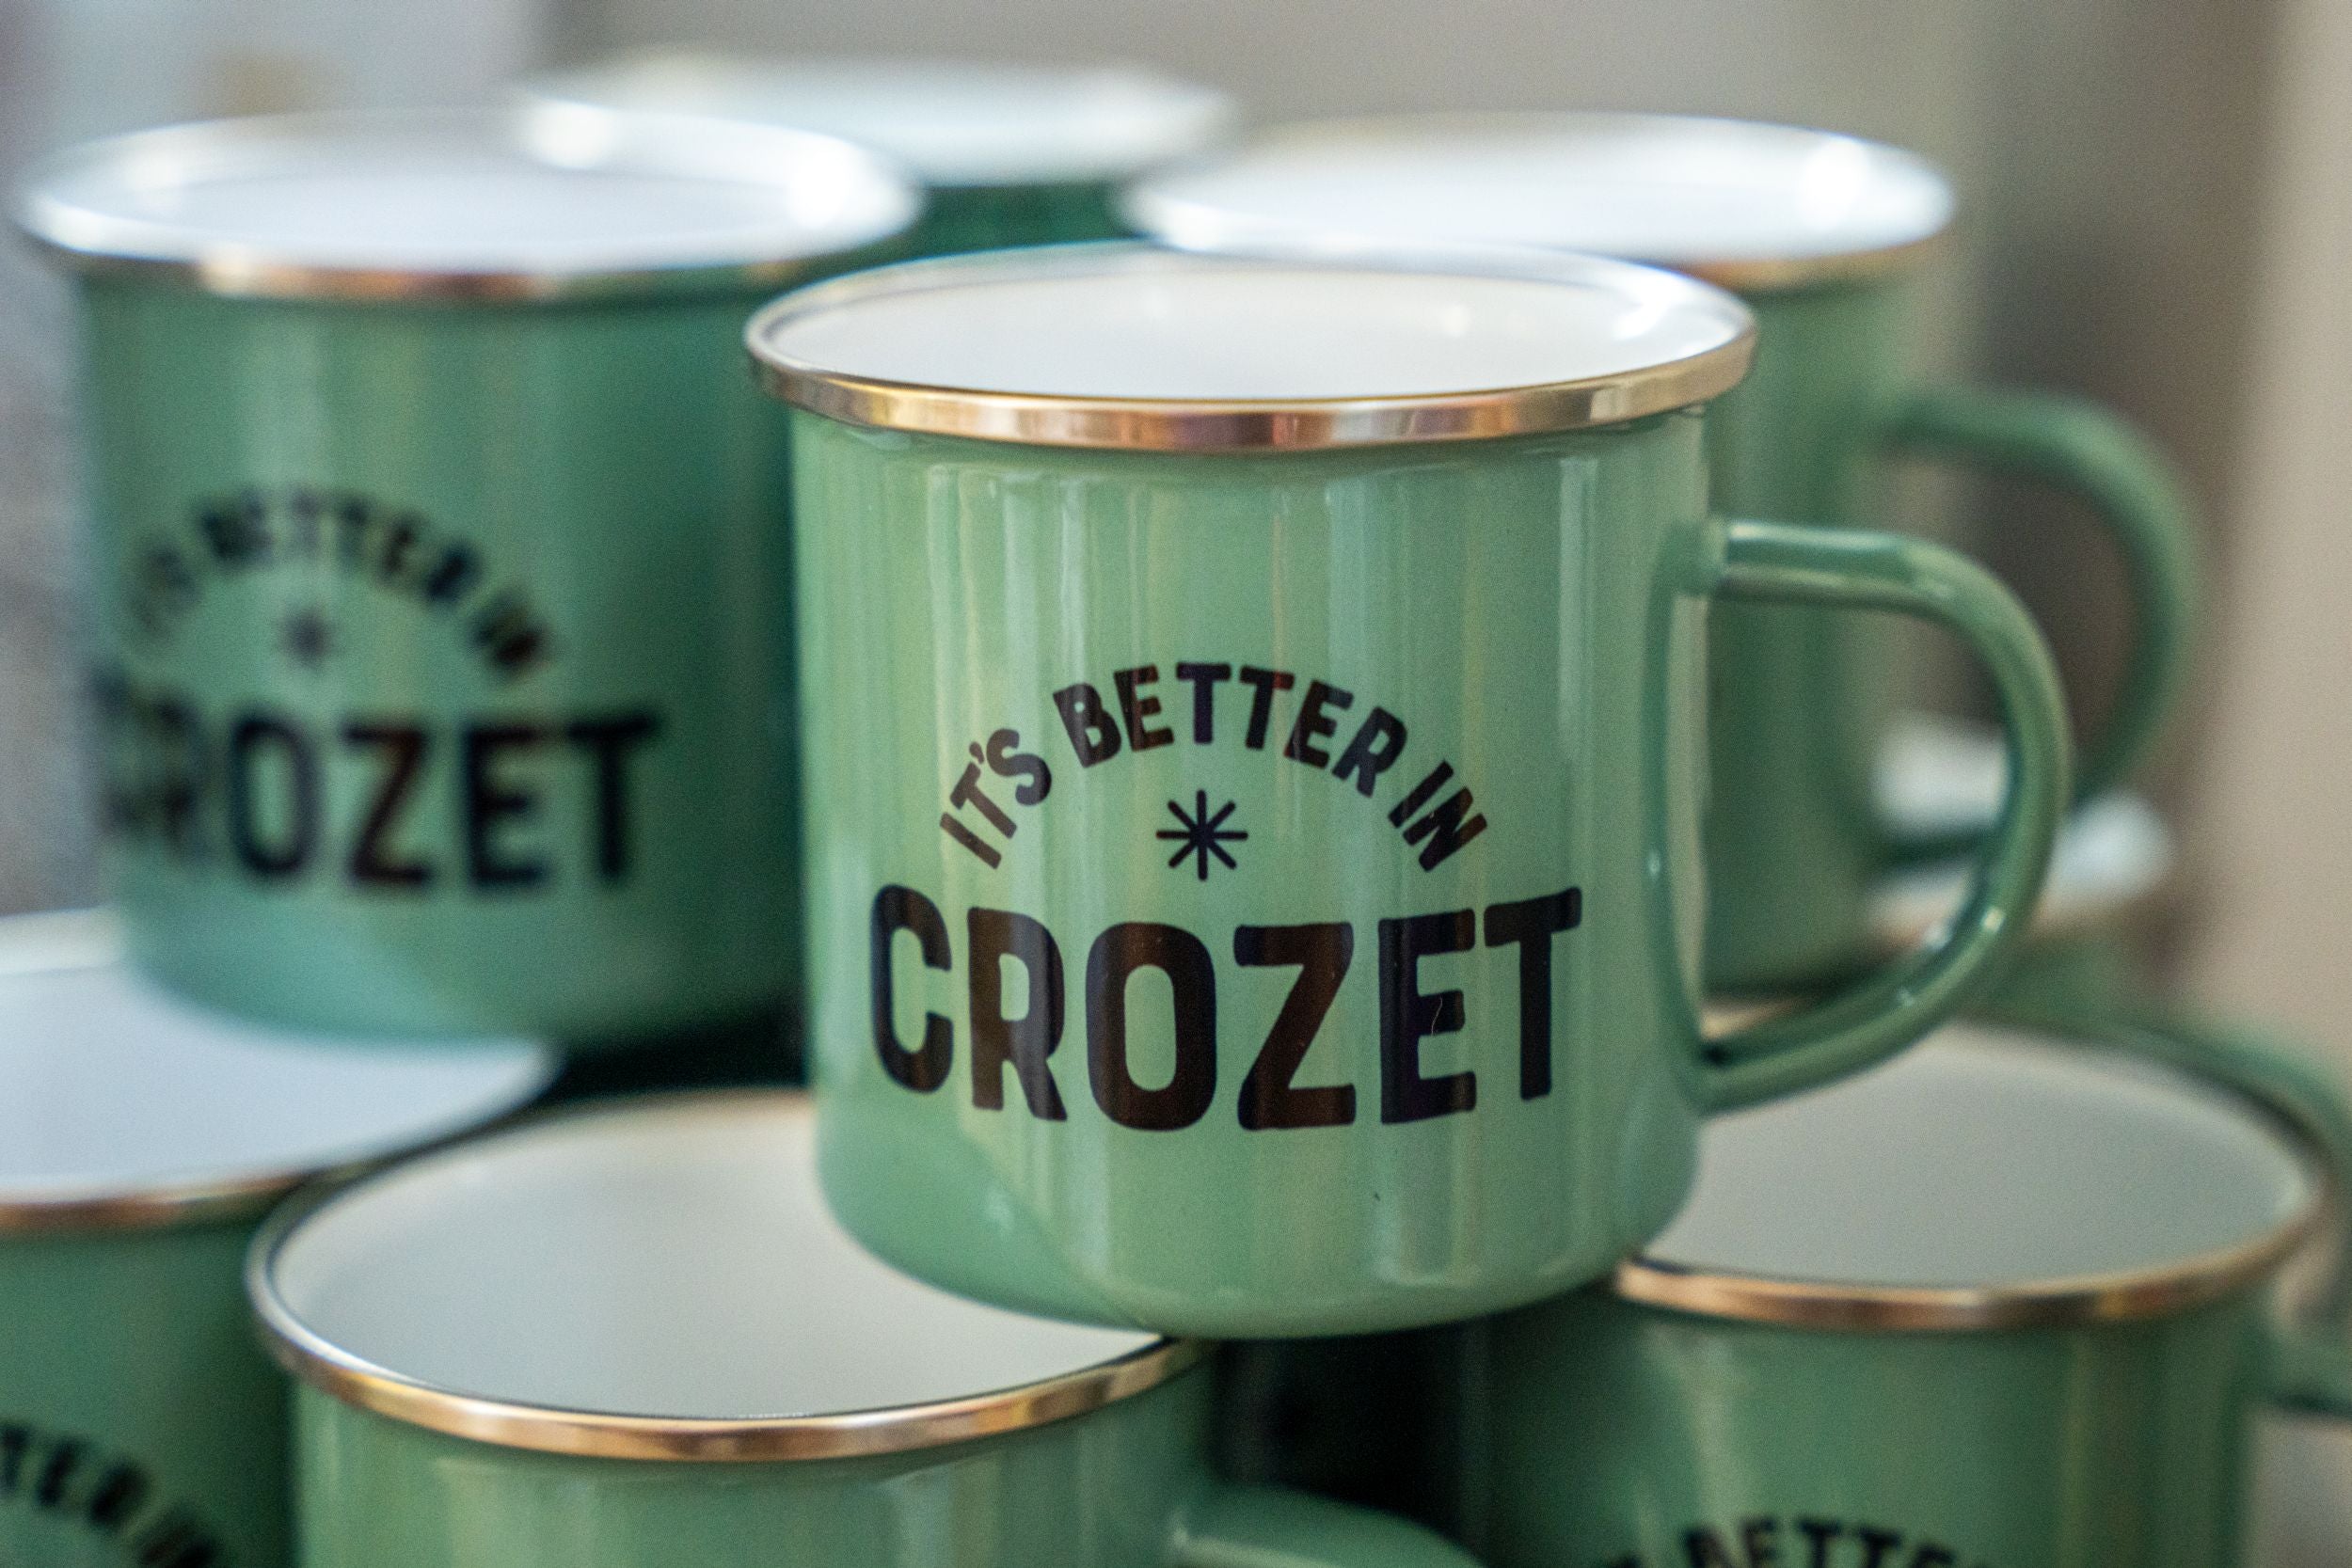 The Crozet Collection